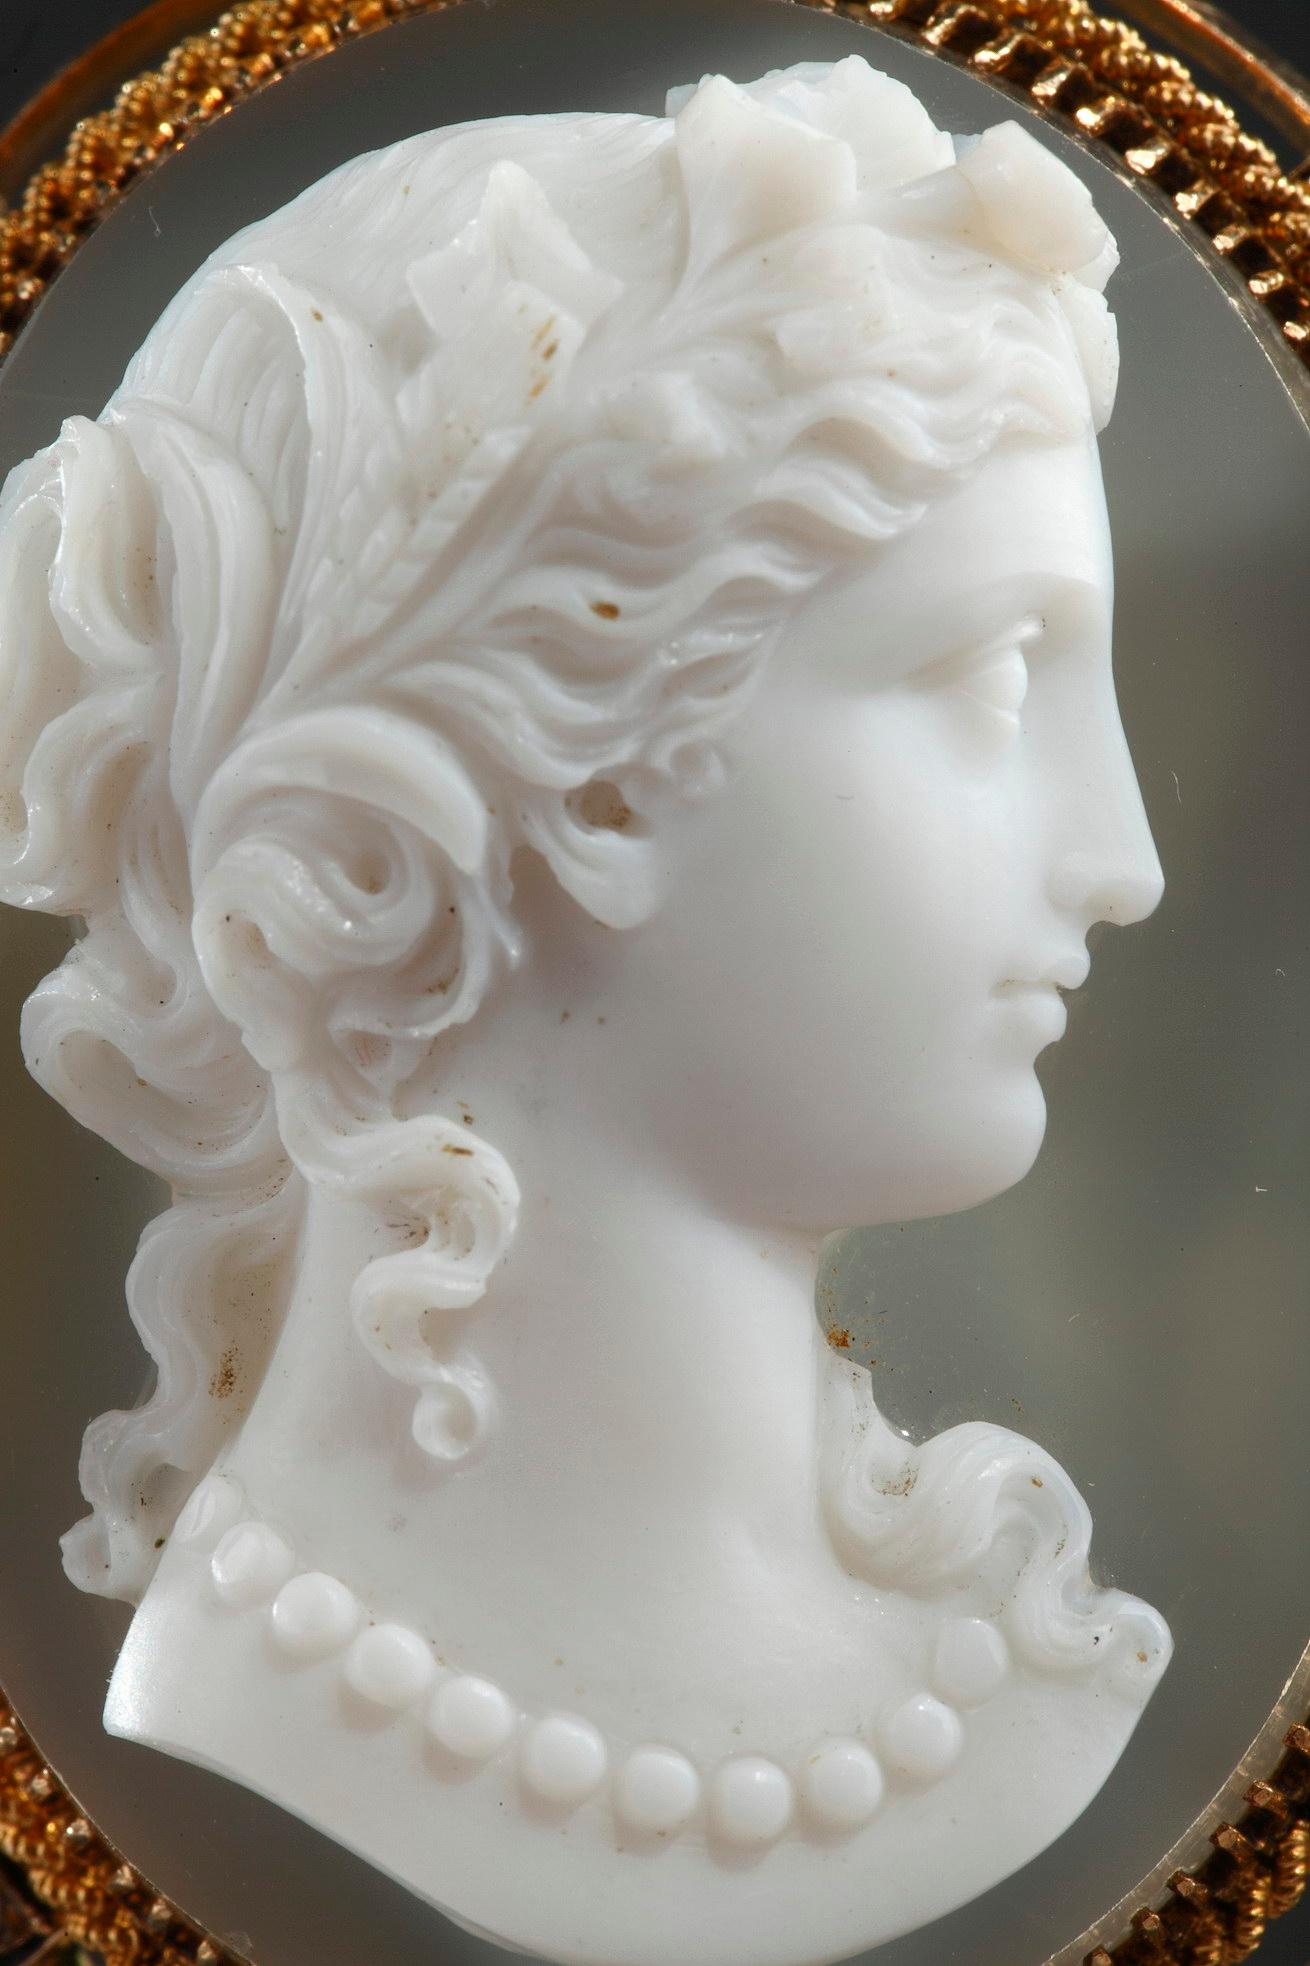 Cameo on blue-gray agate featuring a young woman looking toward the right. The artist intricately sculpted the white vein of the agate to bring the delicate profile to life. The young woman represented in bust has her hair raised and adorned with a